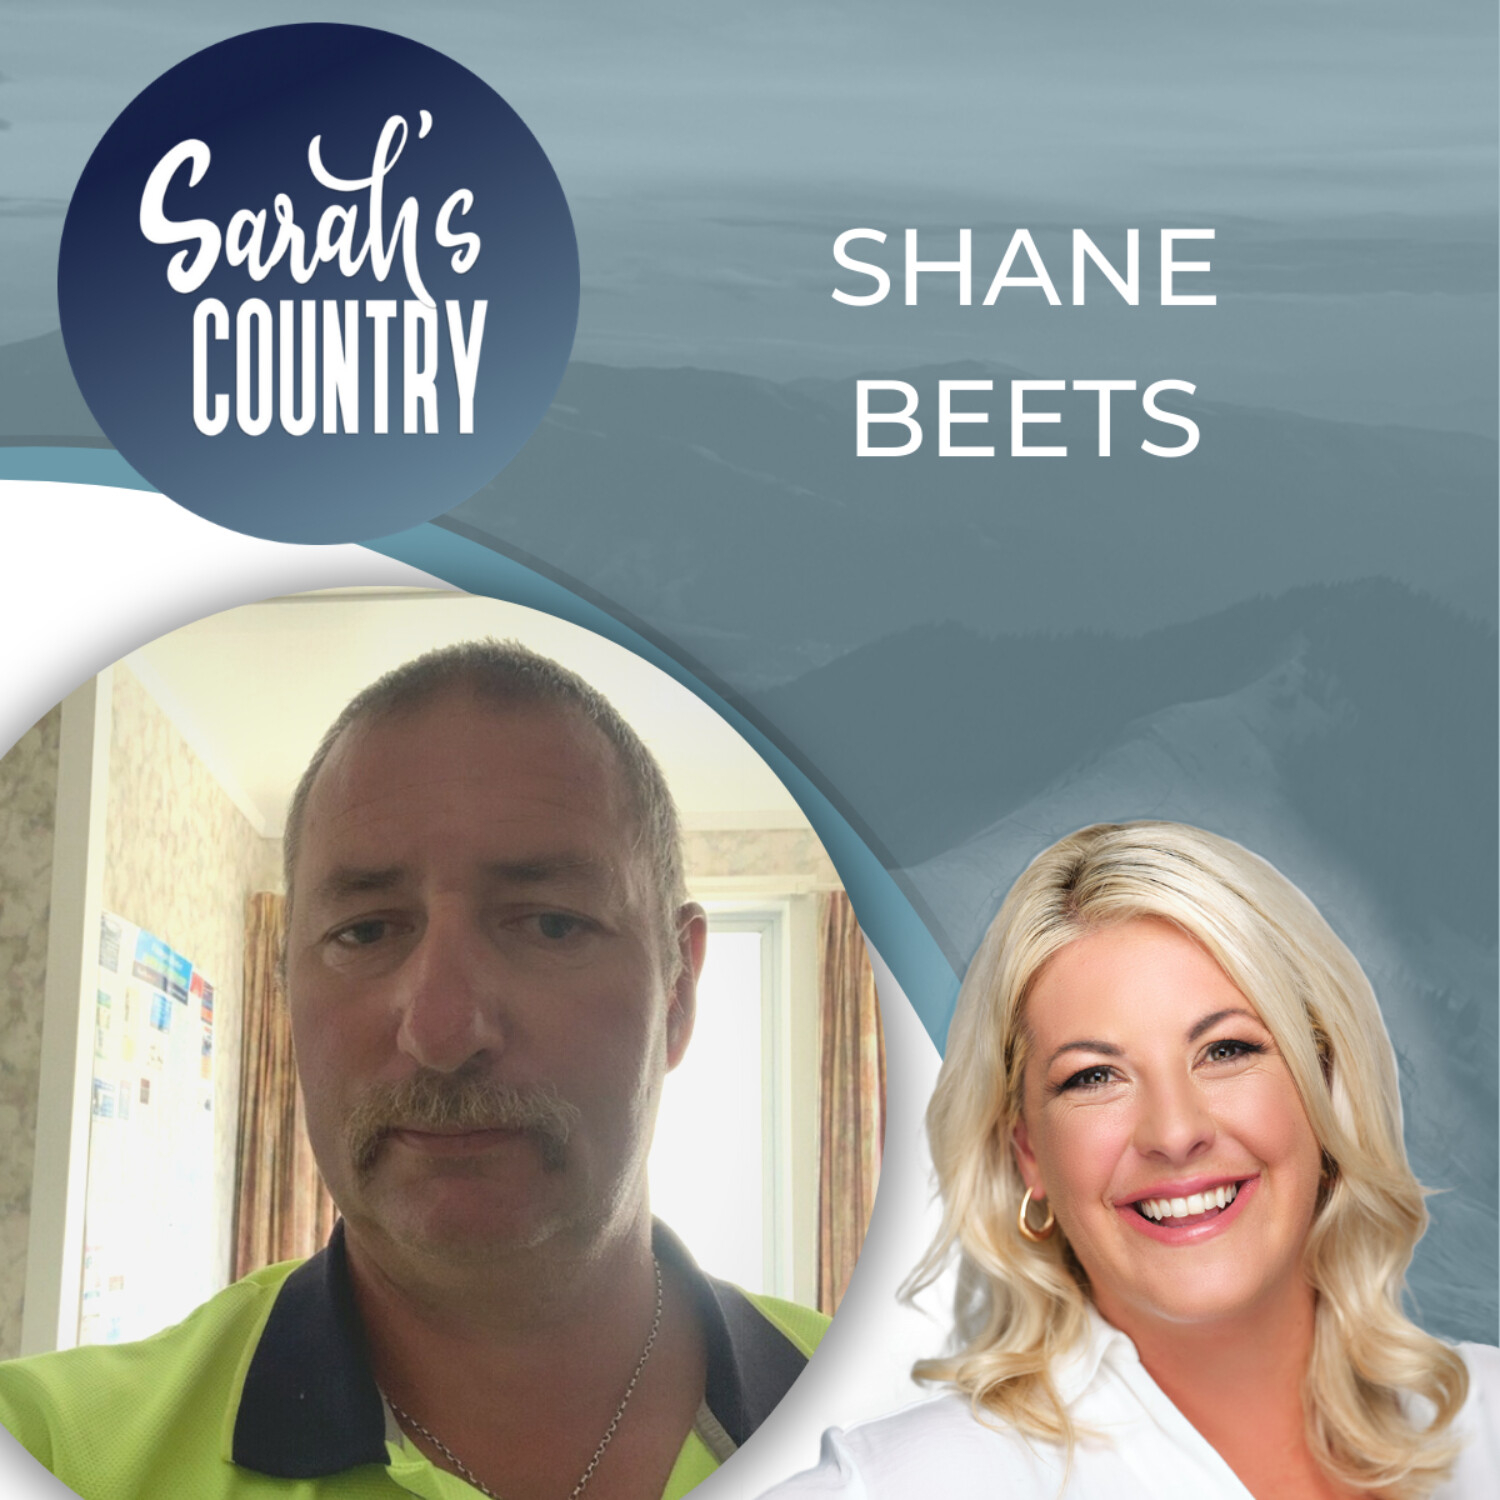 “Waterway fencing costs ‘unrealistic’” with Shane Beets